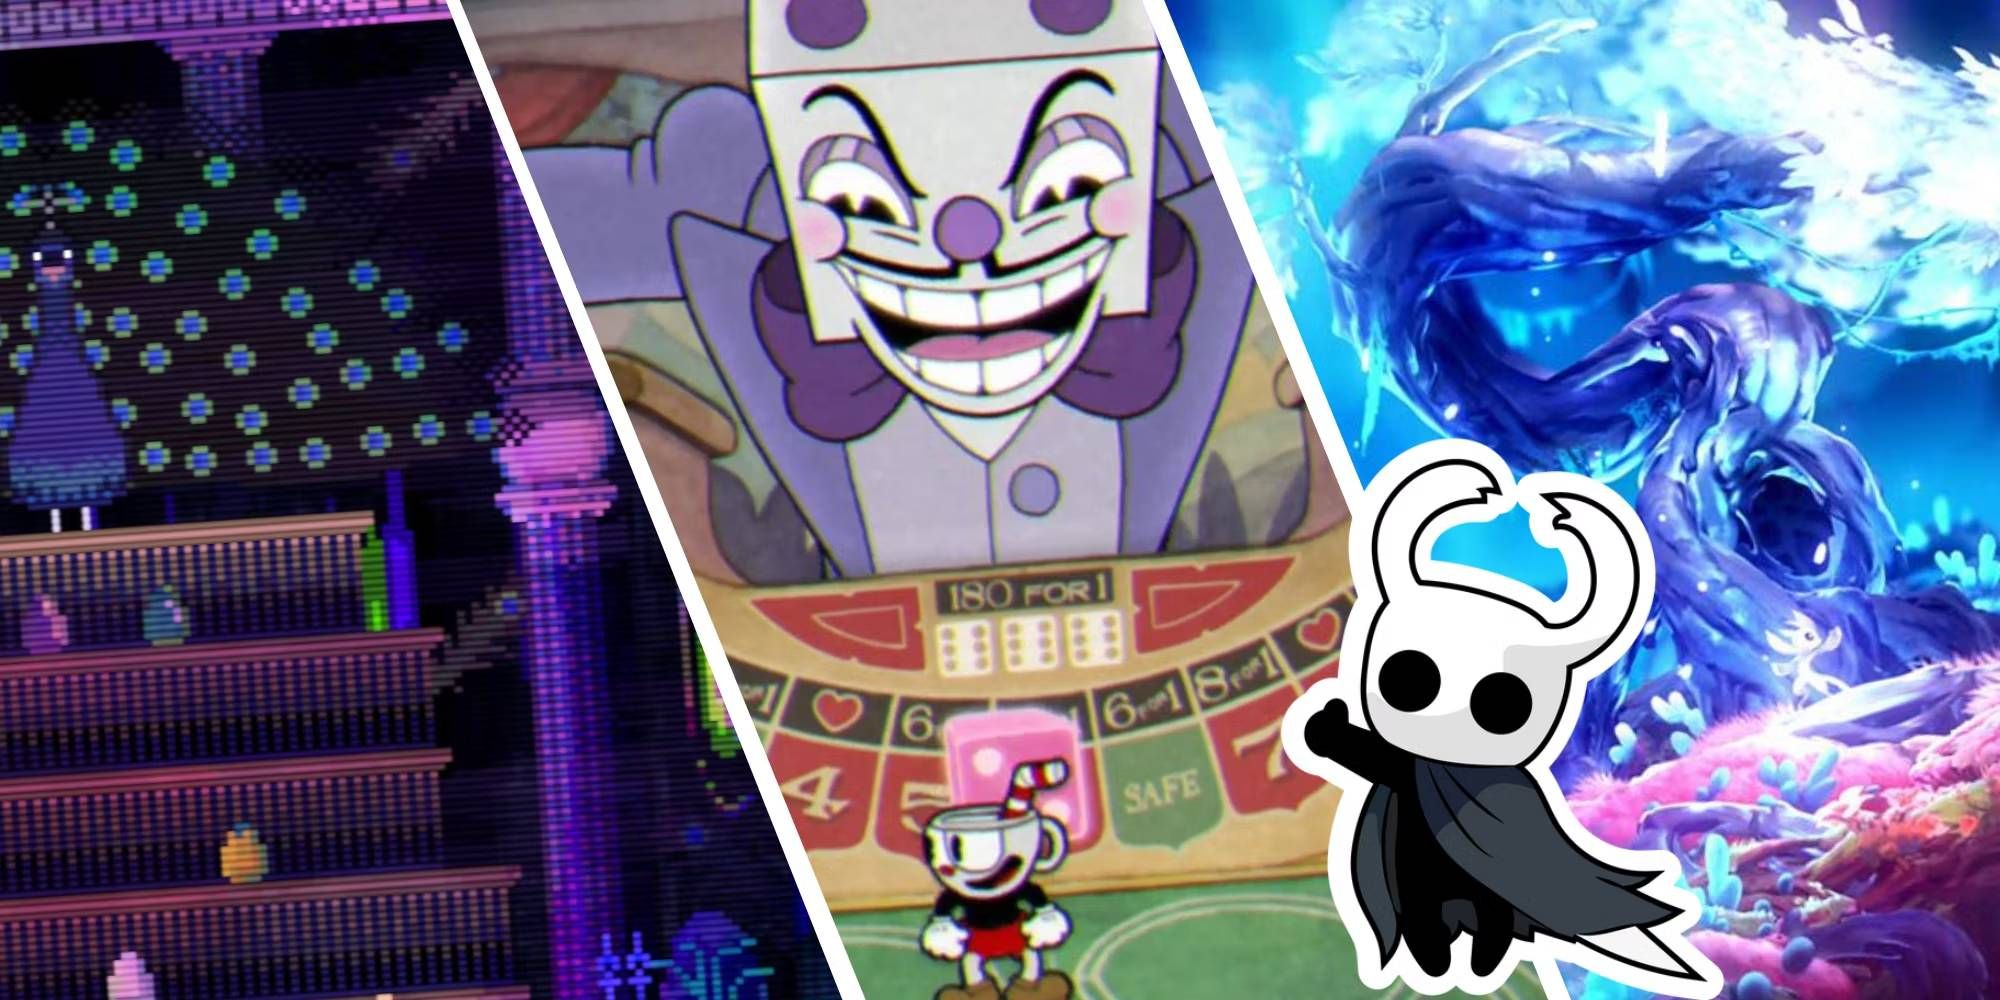 Three panel split image of Animal Well, Cuphead, and Ori and the Blind Forest gameplay with a little Knight from Hollow Knight giving us the thumbs up in the center